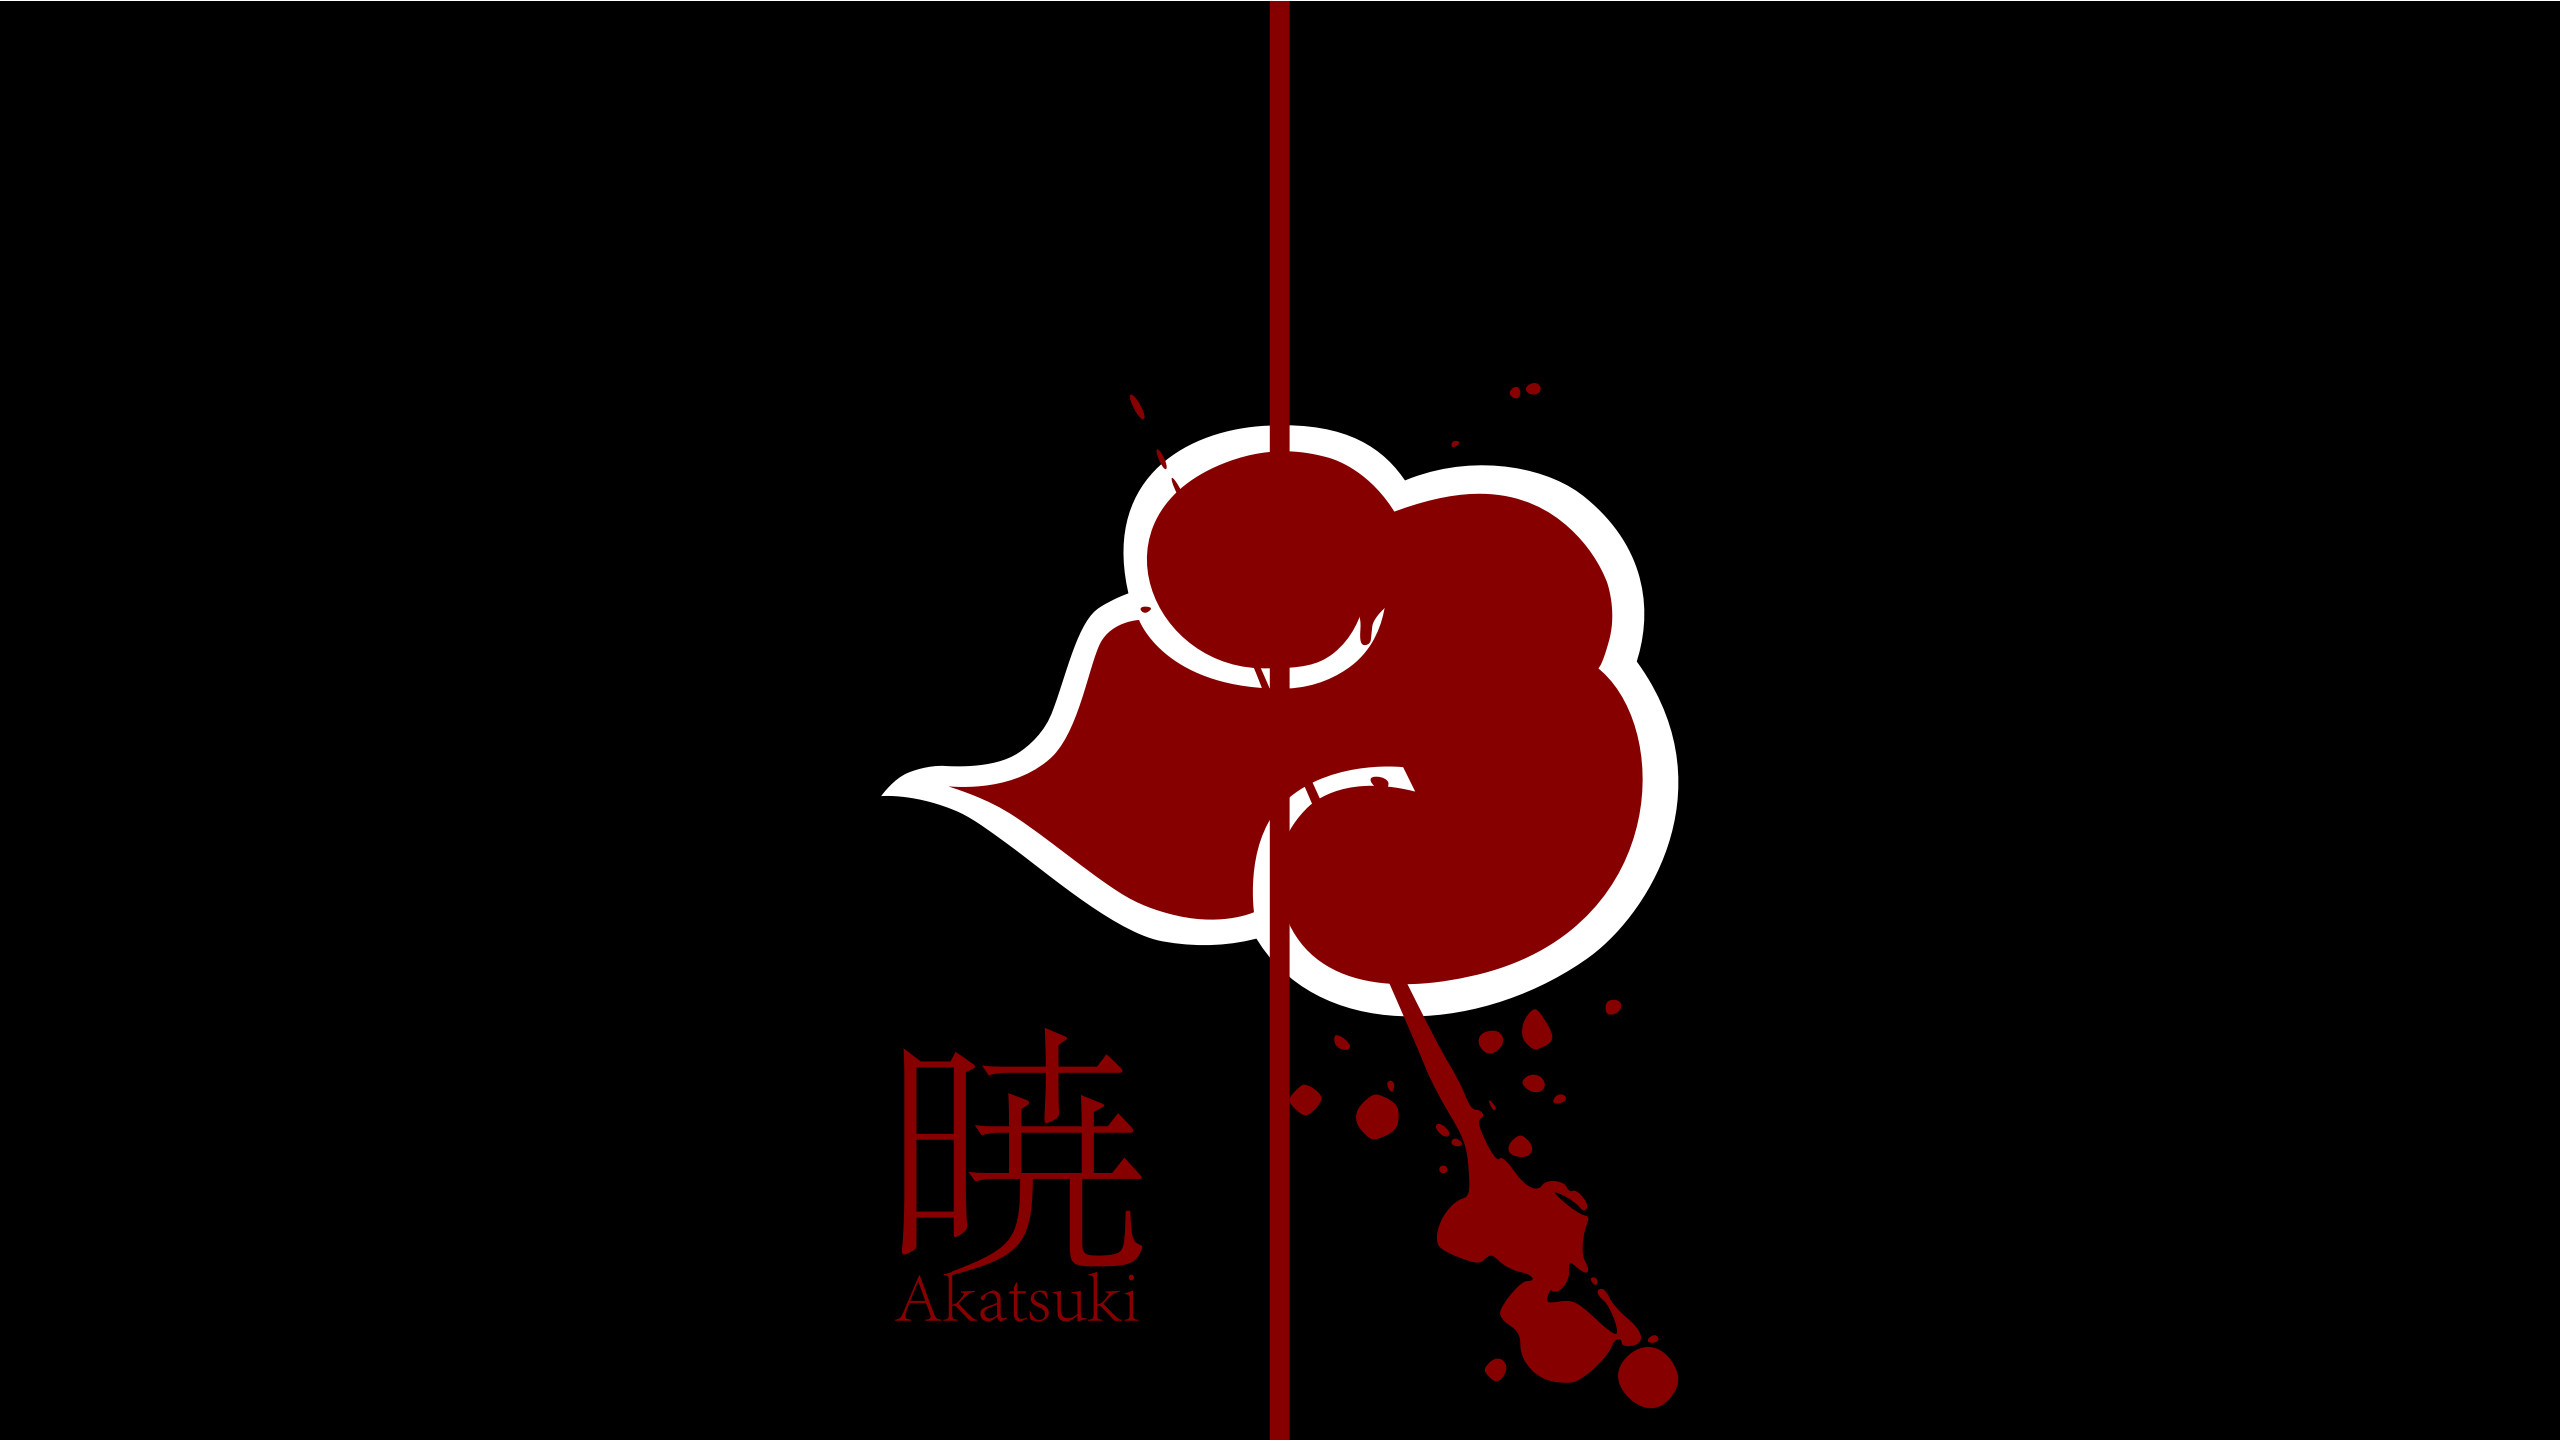 2560x1440 Backgrounds Akatsuki Iphone Hd For Orochimaru Wallpaper Picture Laptop  Images Computer